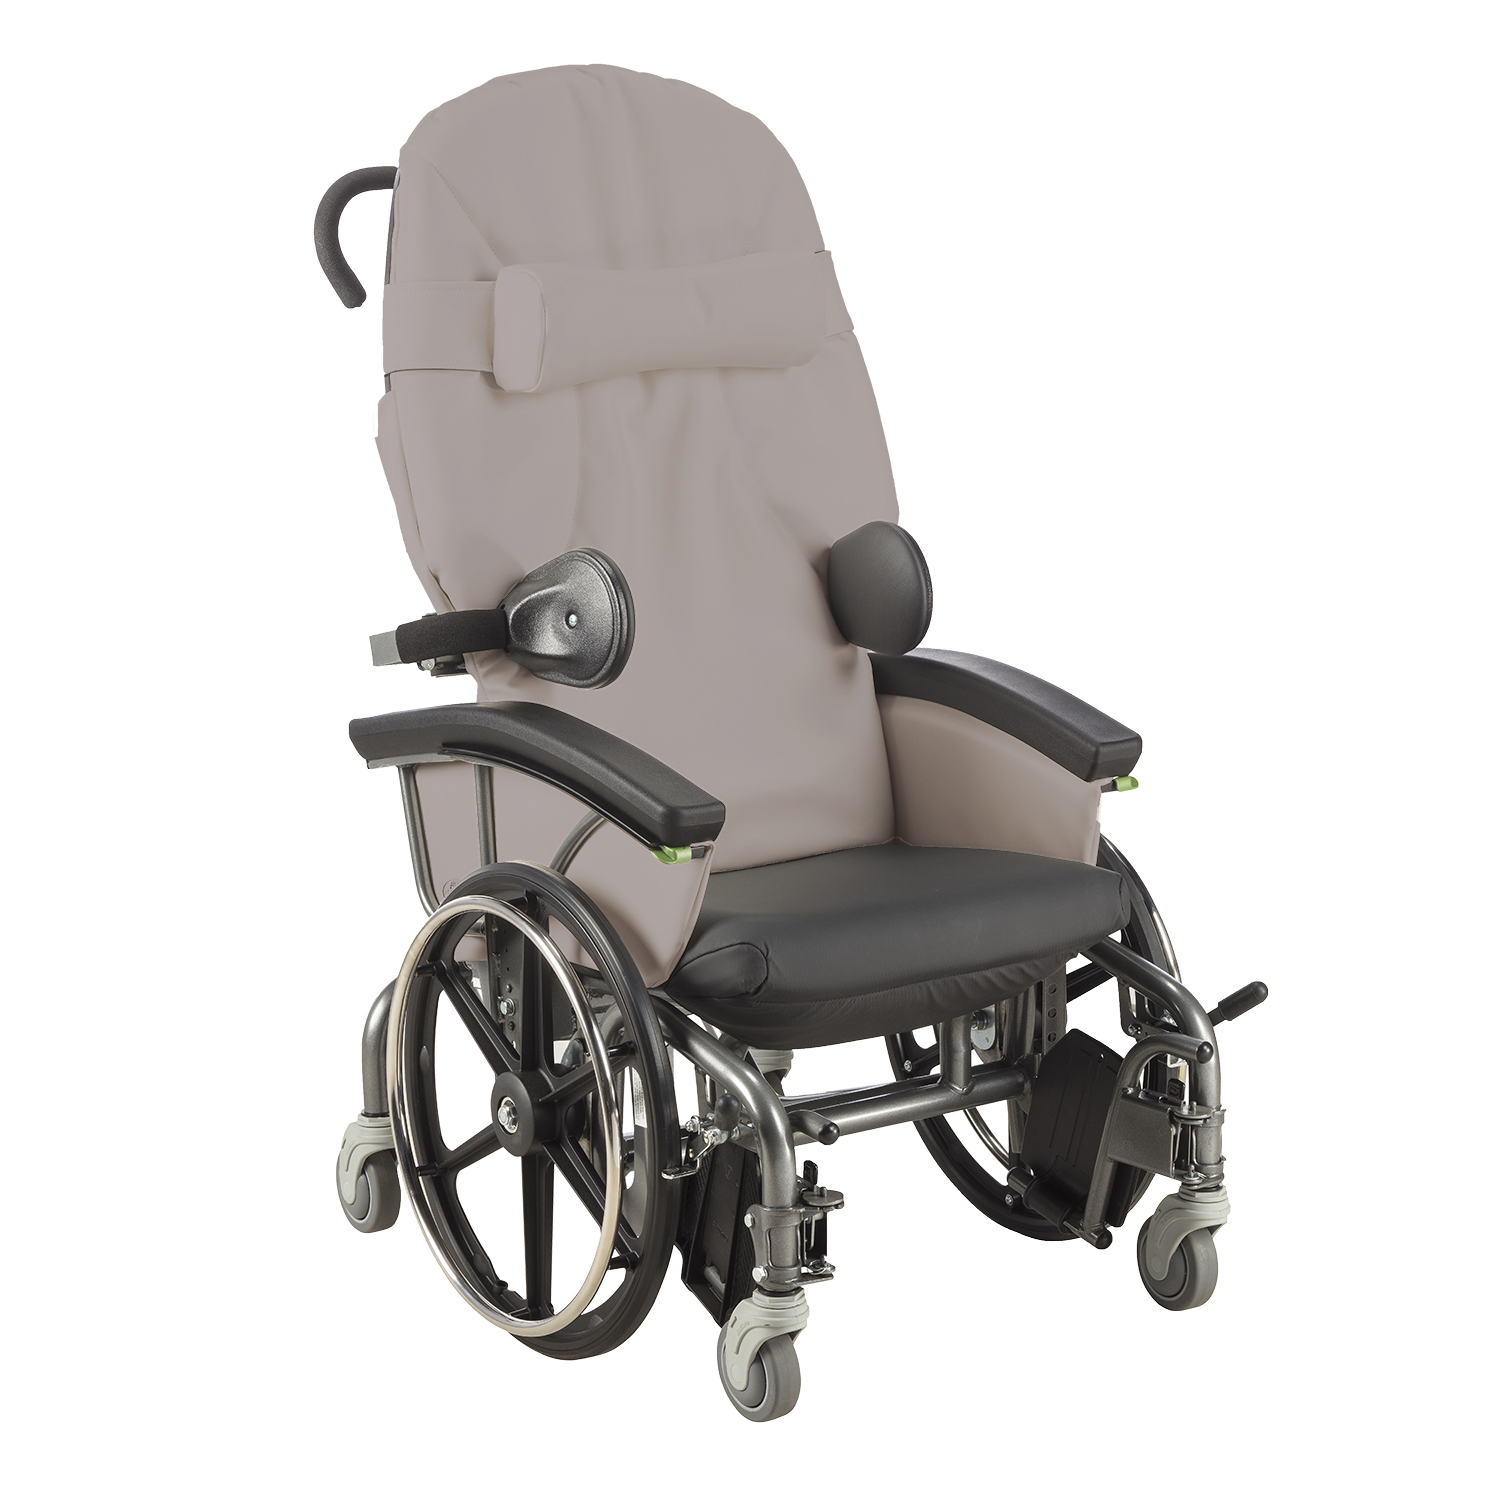 Reduce Falls & Increase Independent Mobility | Evolution Mobility Chair